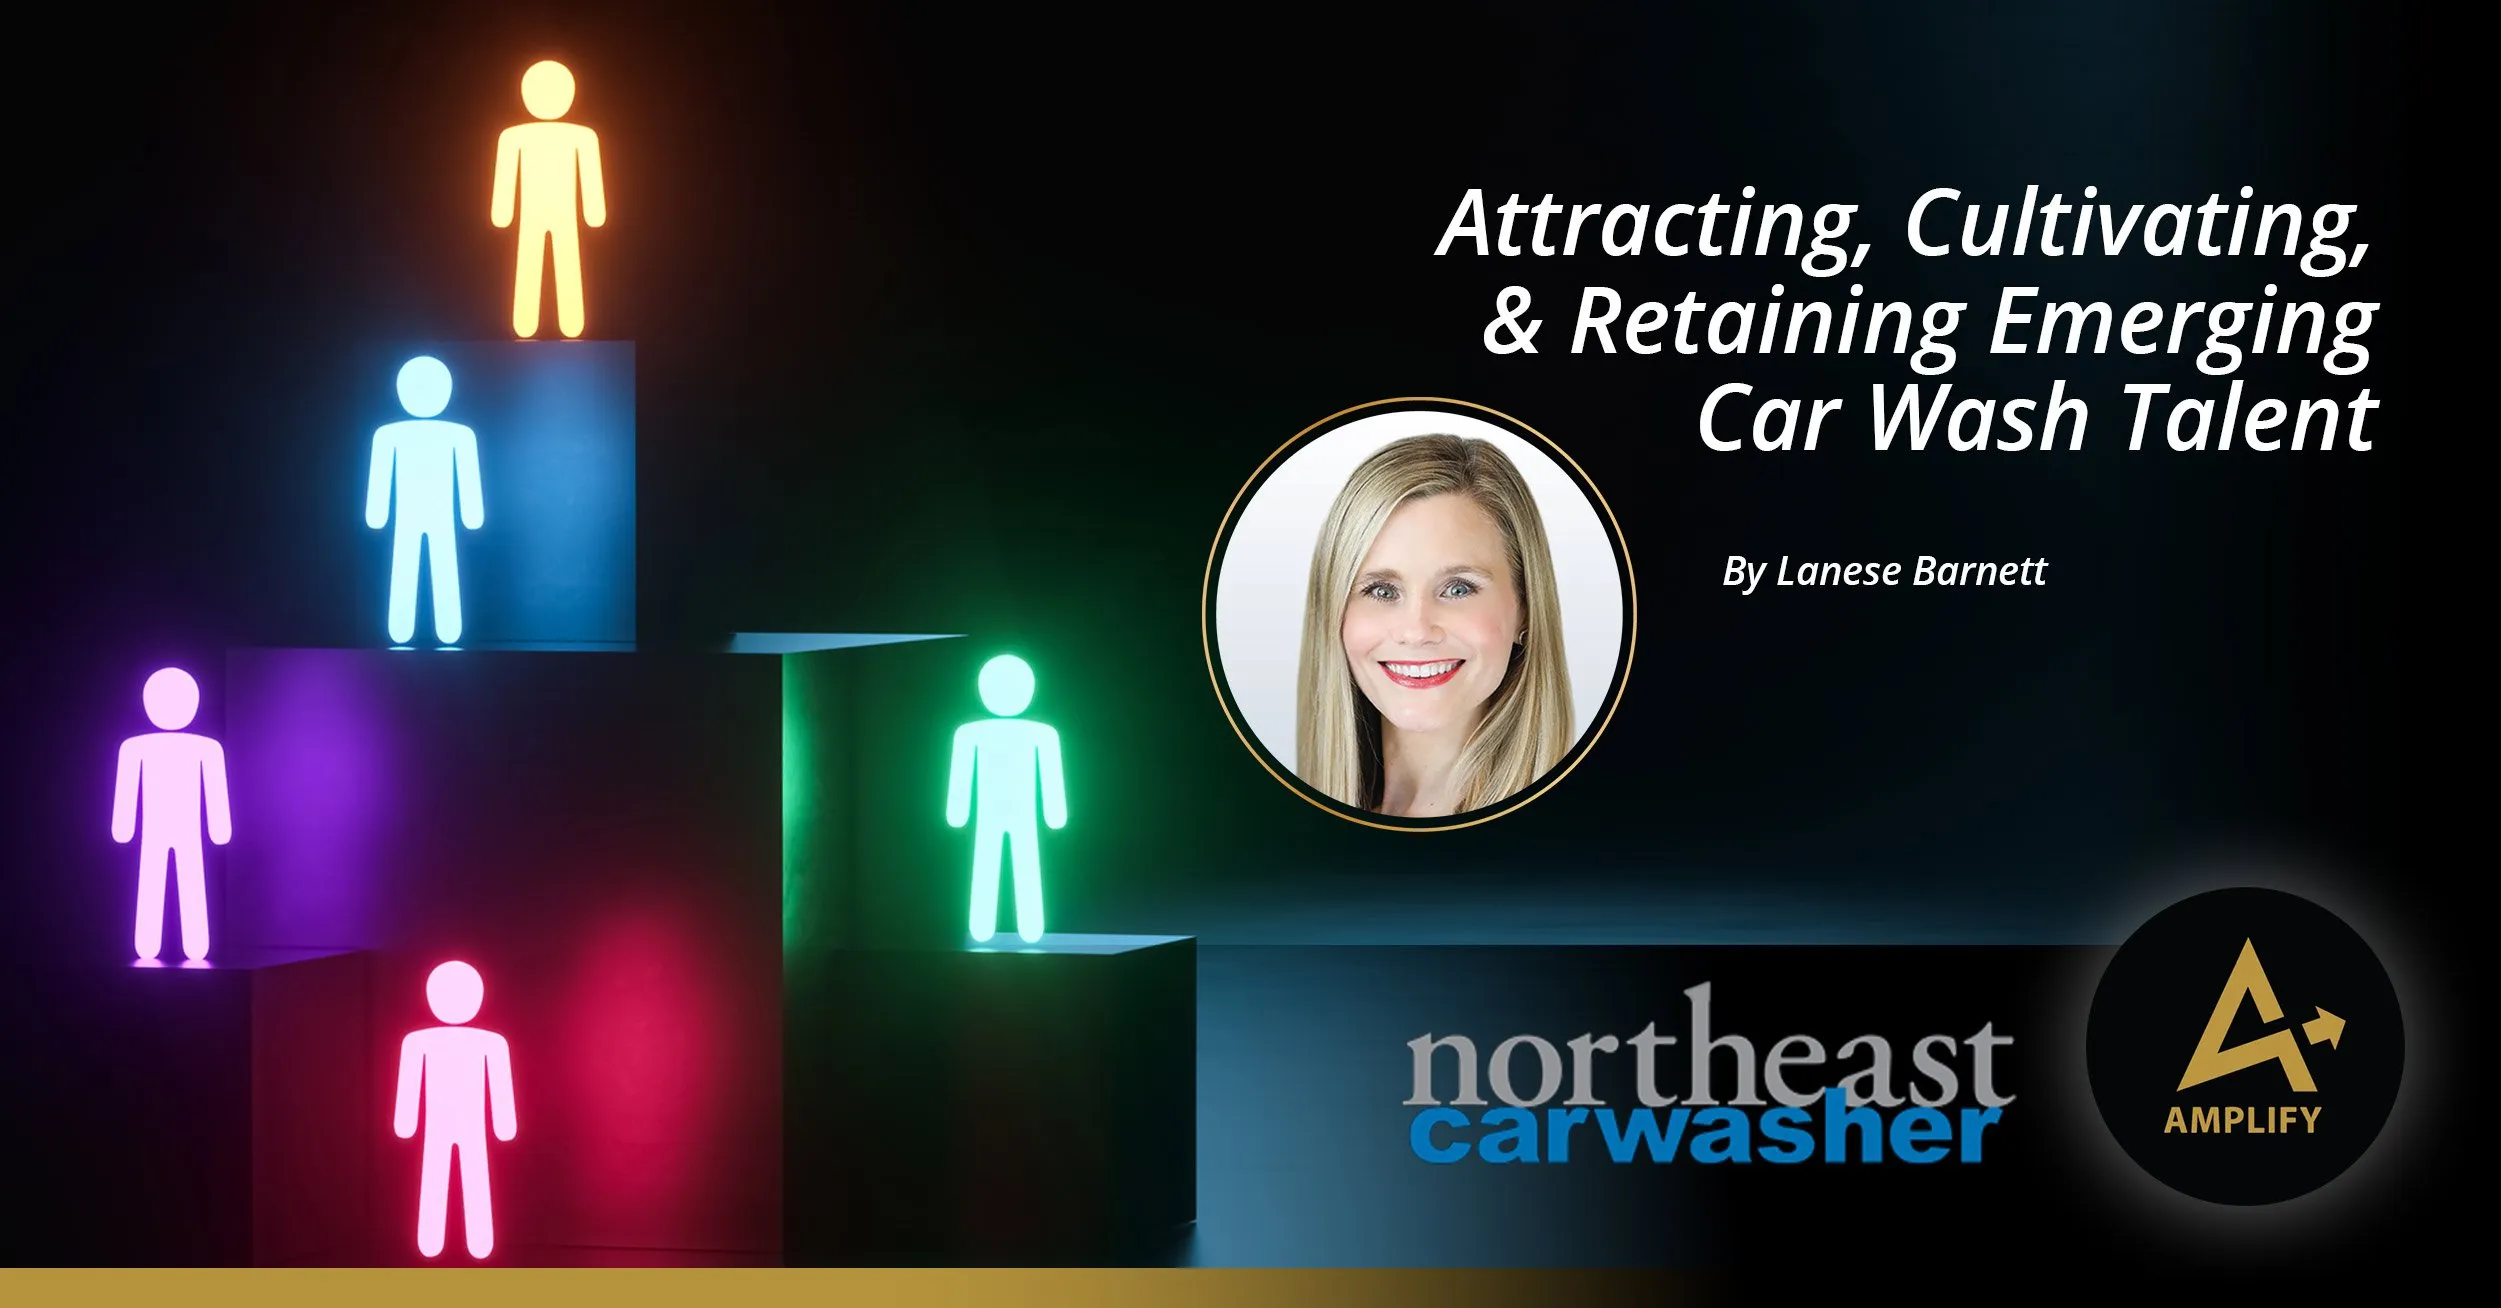 Attracting, Cultivating & Retaining Emerging Carwash Talent